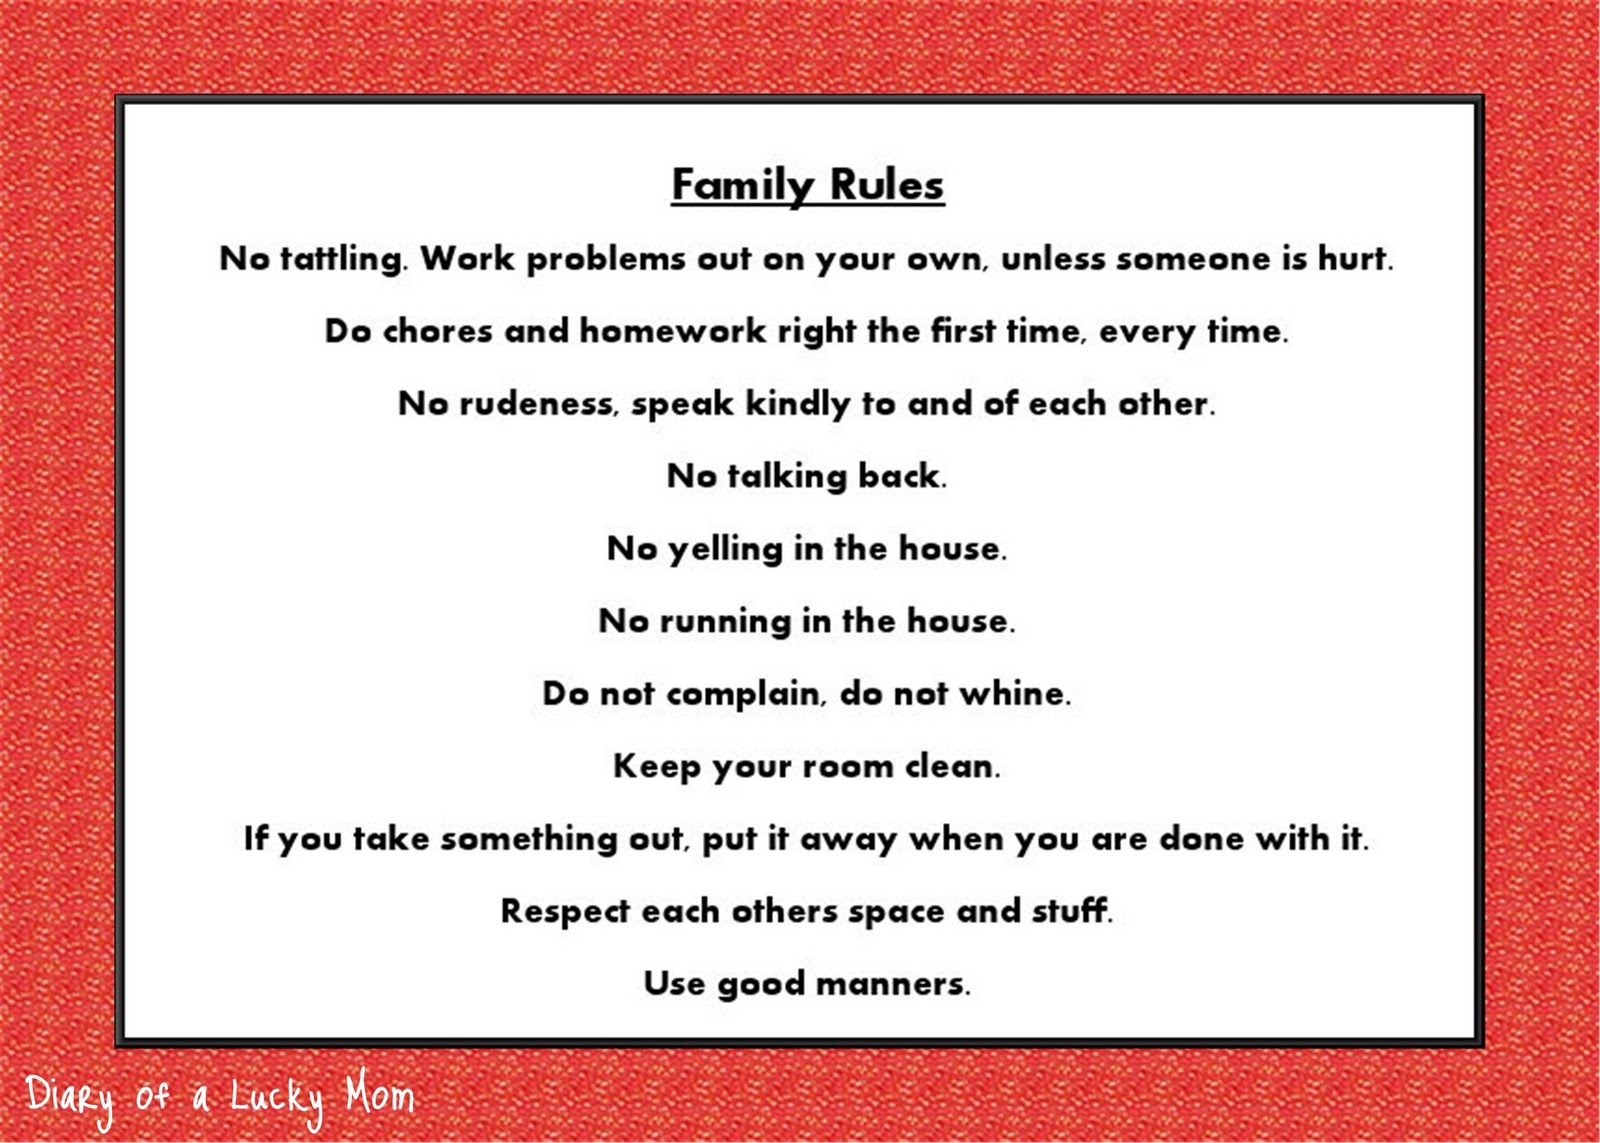 Family rules male pic